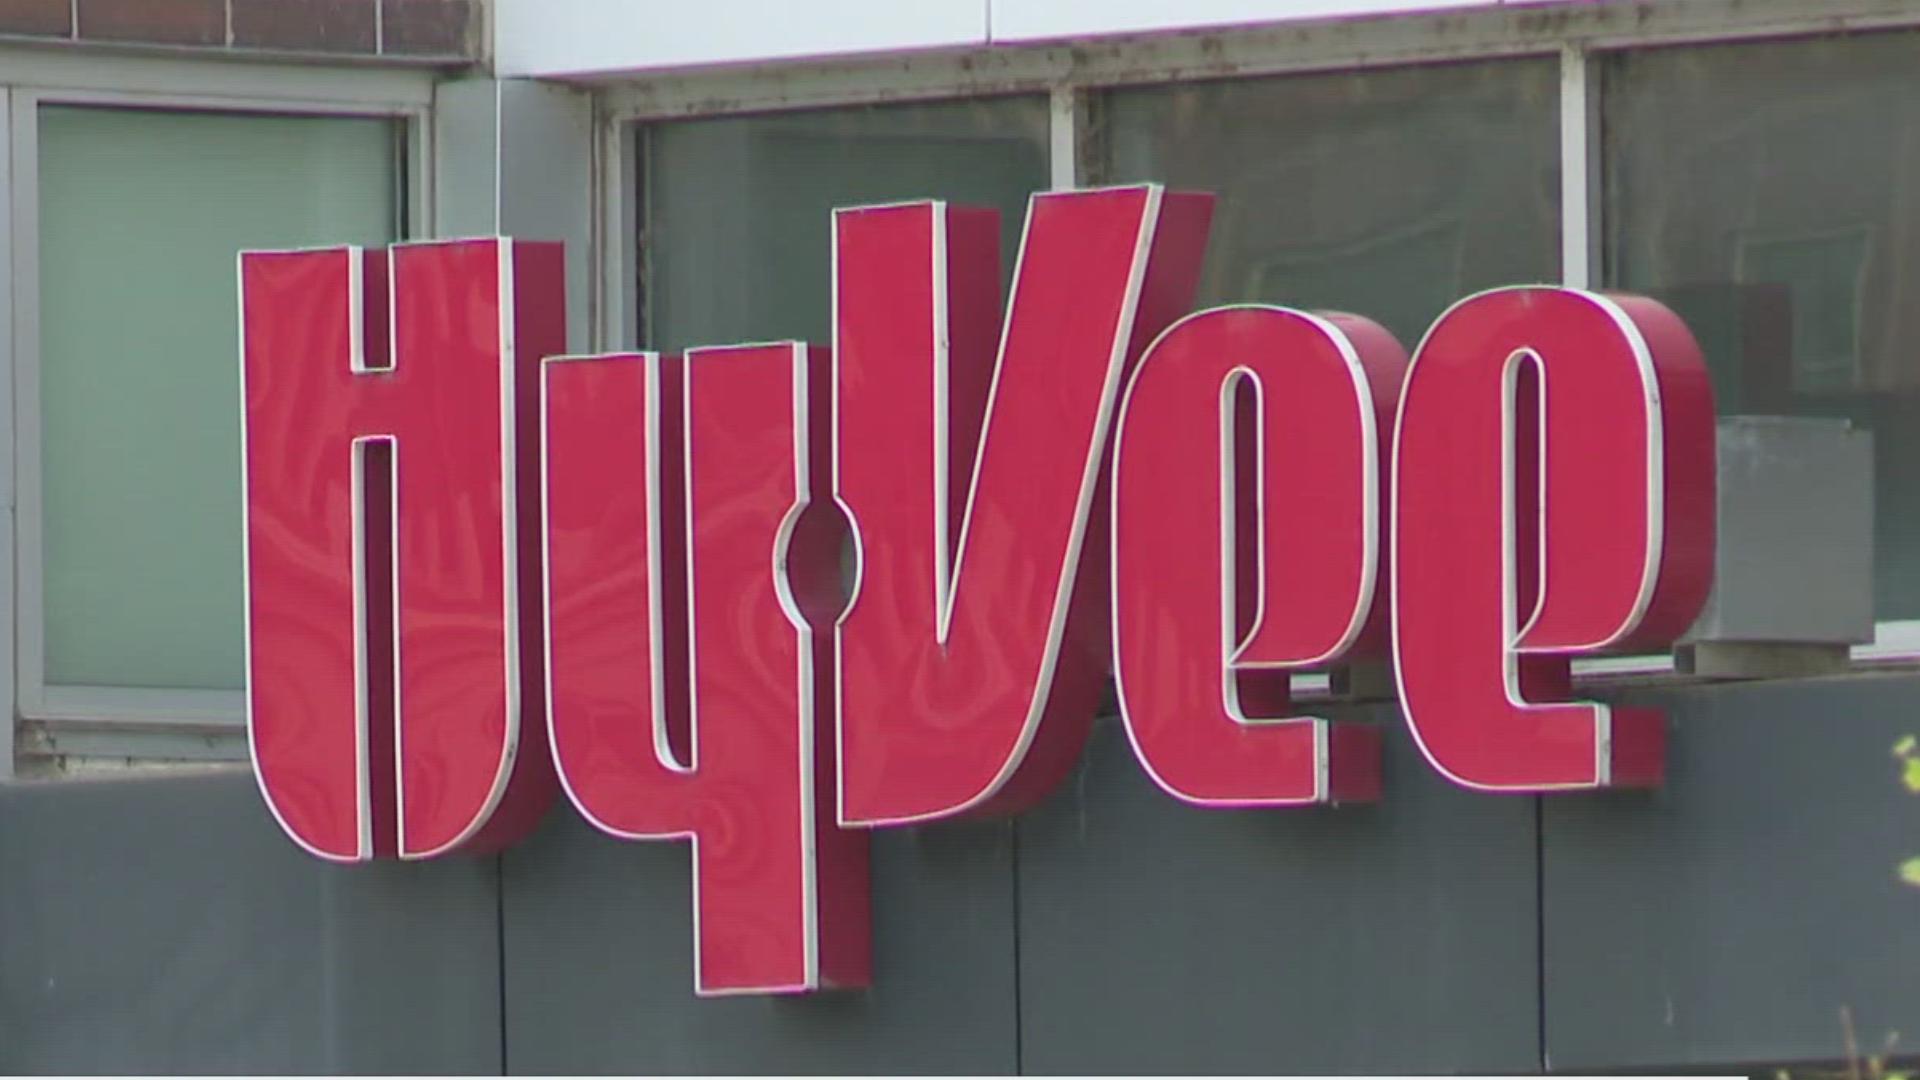 The 4th + Court Hy-Vee has adjusted its hours, but Des Moines City Council is hoping "for more" from one of the area's only grocery stores.